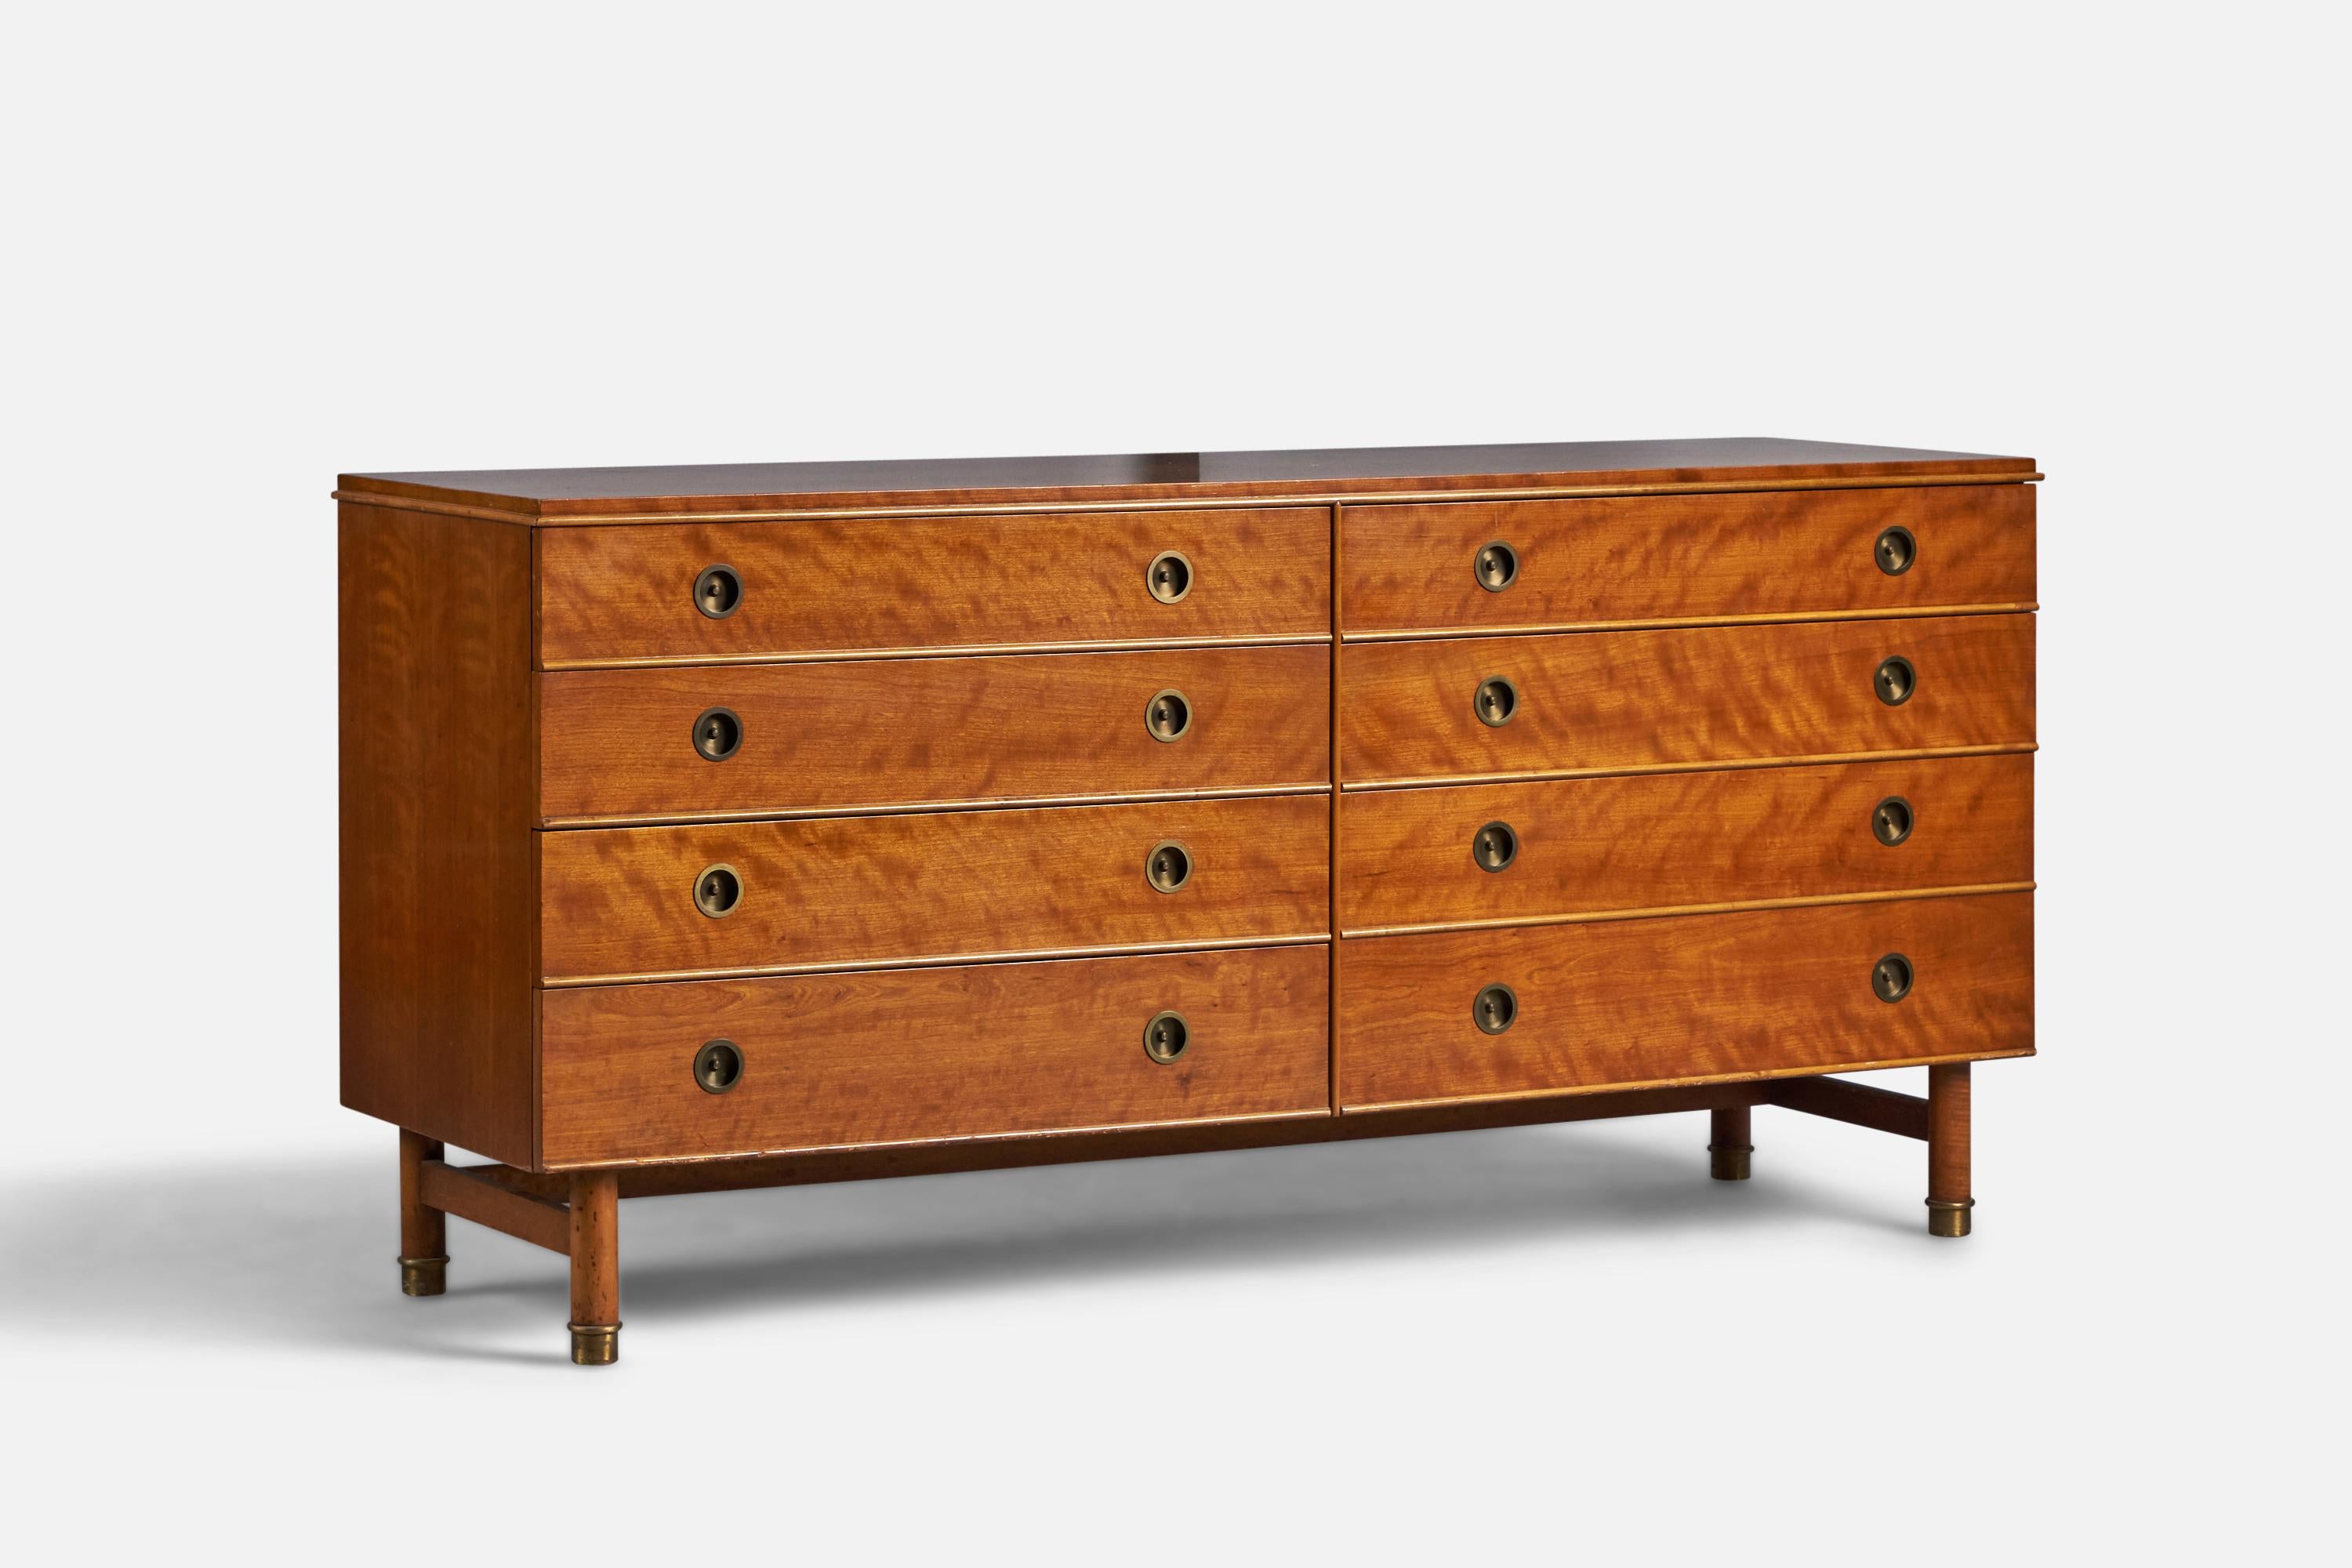 A mahogany, brass and maple dresser produced by Johnson Furniture Company USA, c. 1950s. Design attributed to Renzo Rutili.